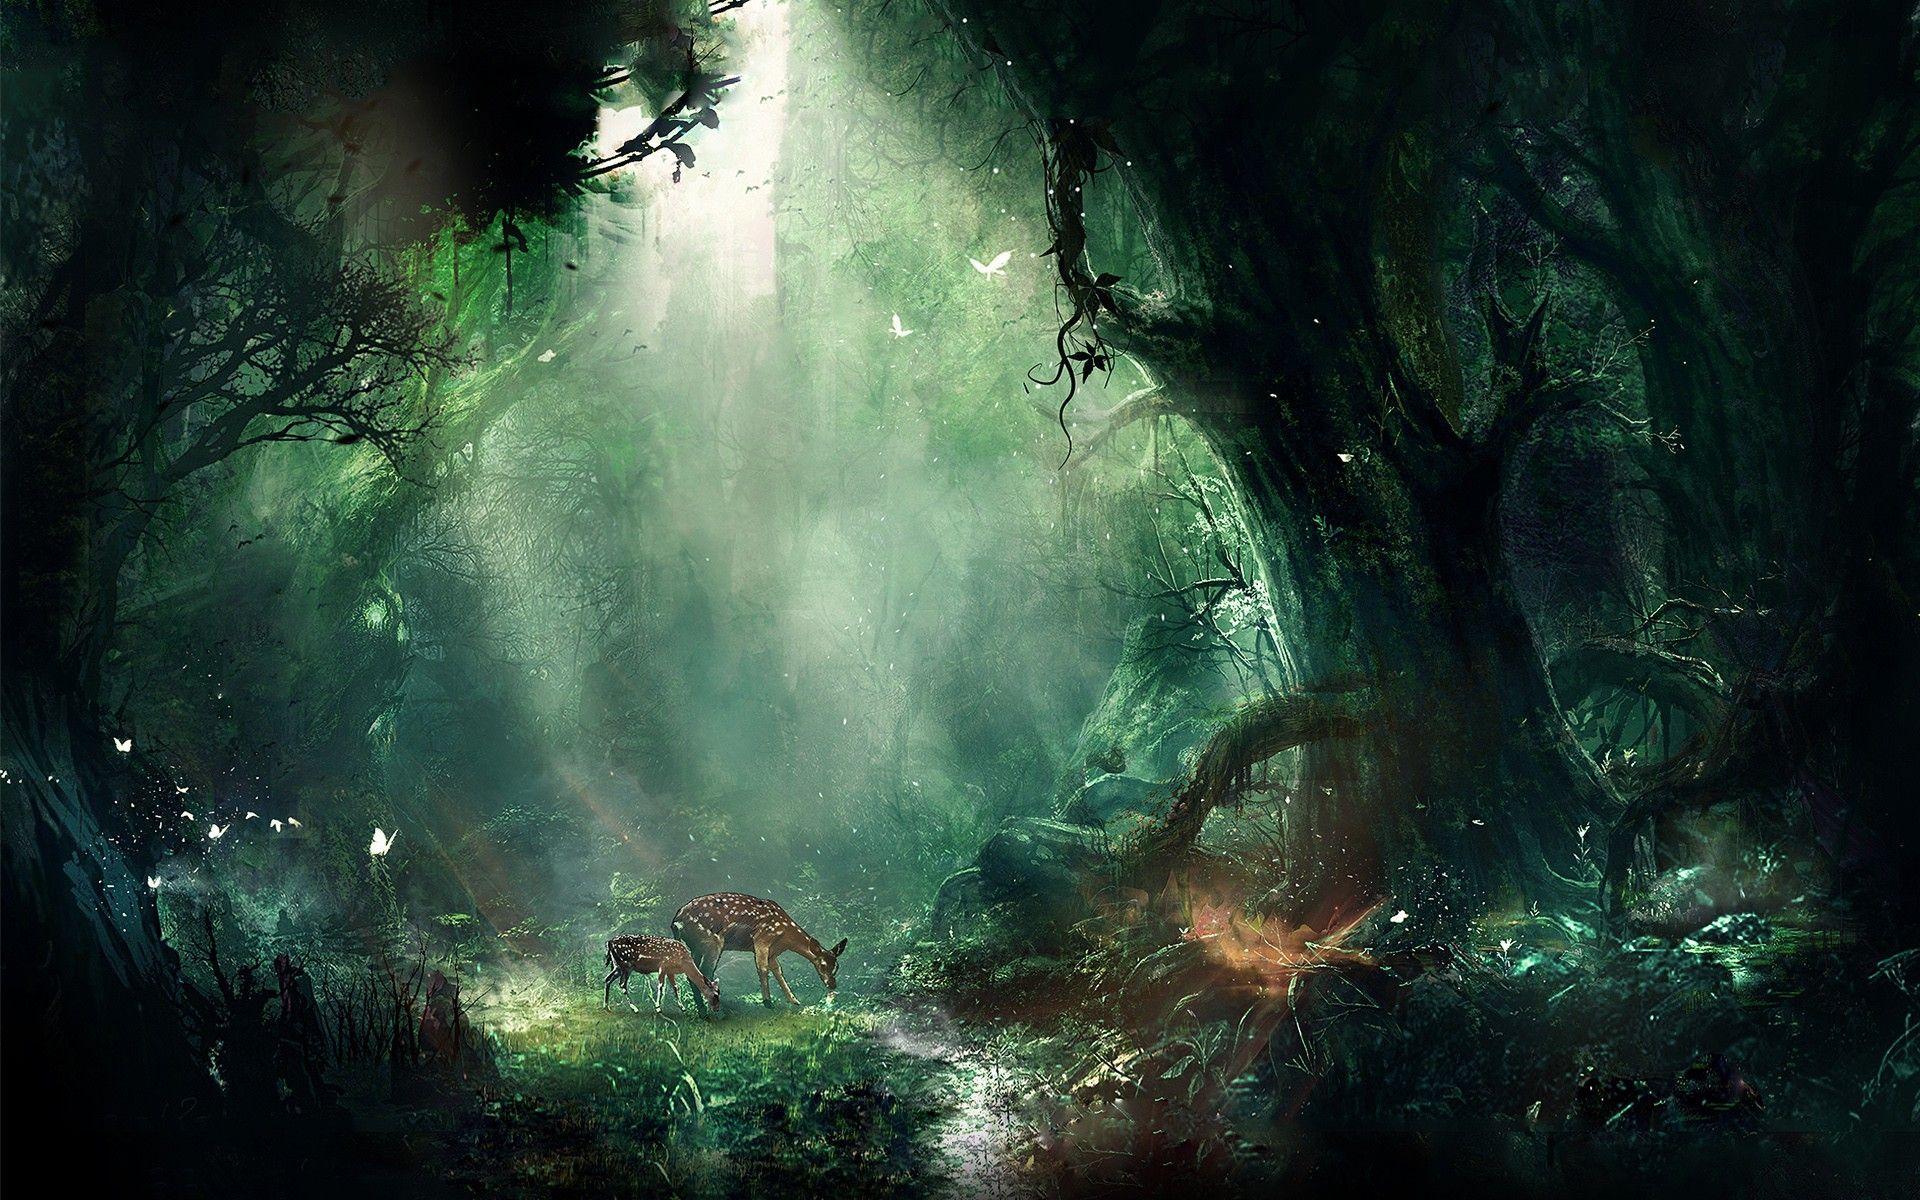 Deer often graze in the magic forest wallpaper and image